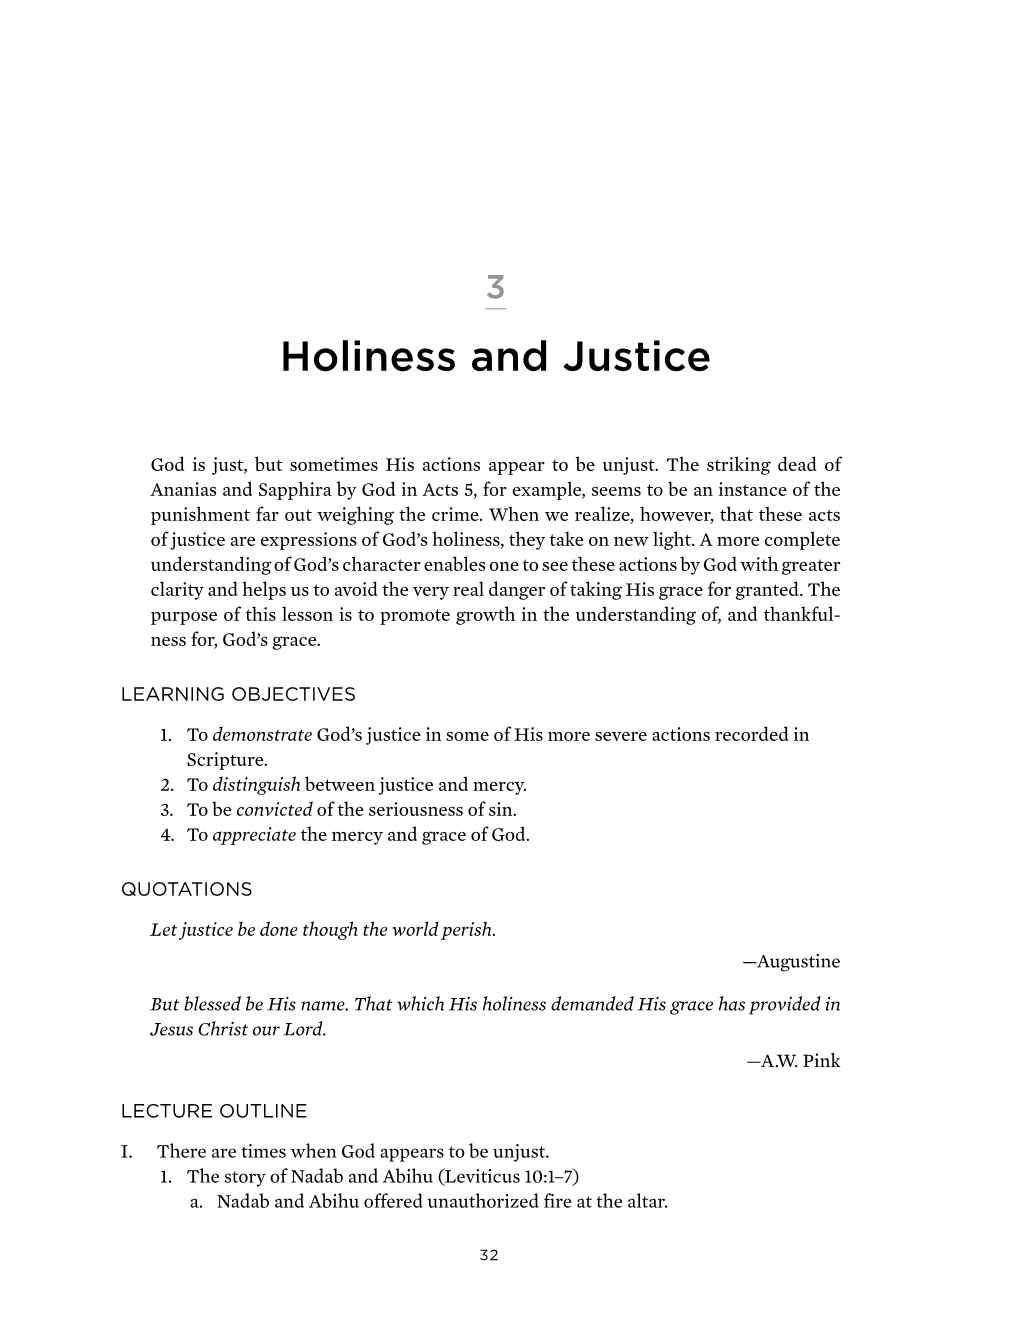 Holiness and Justice